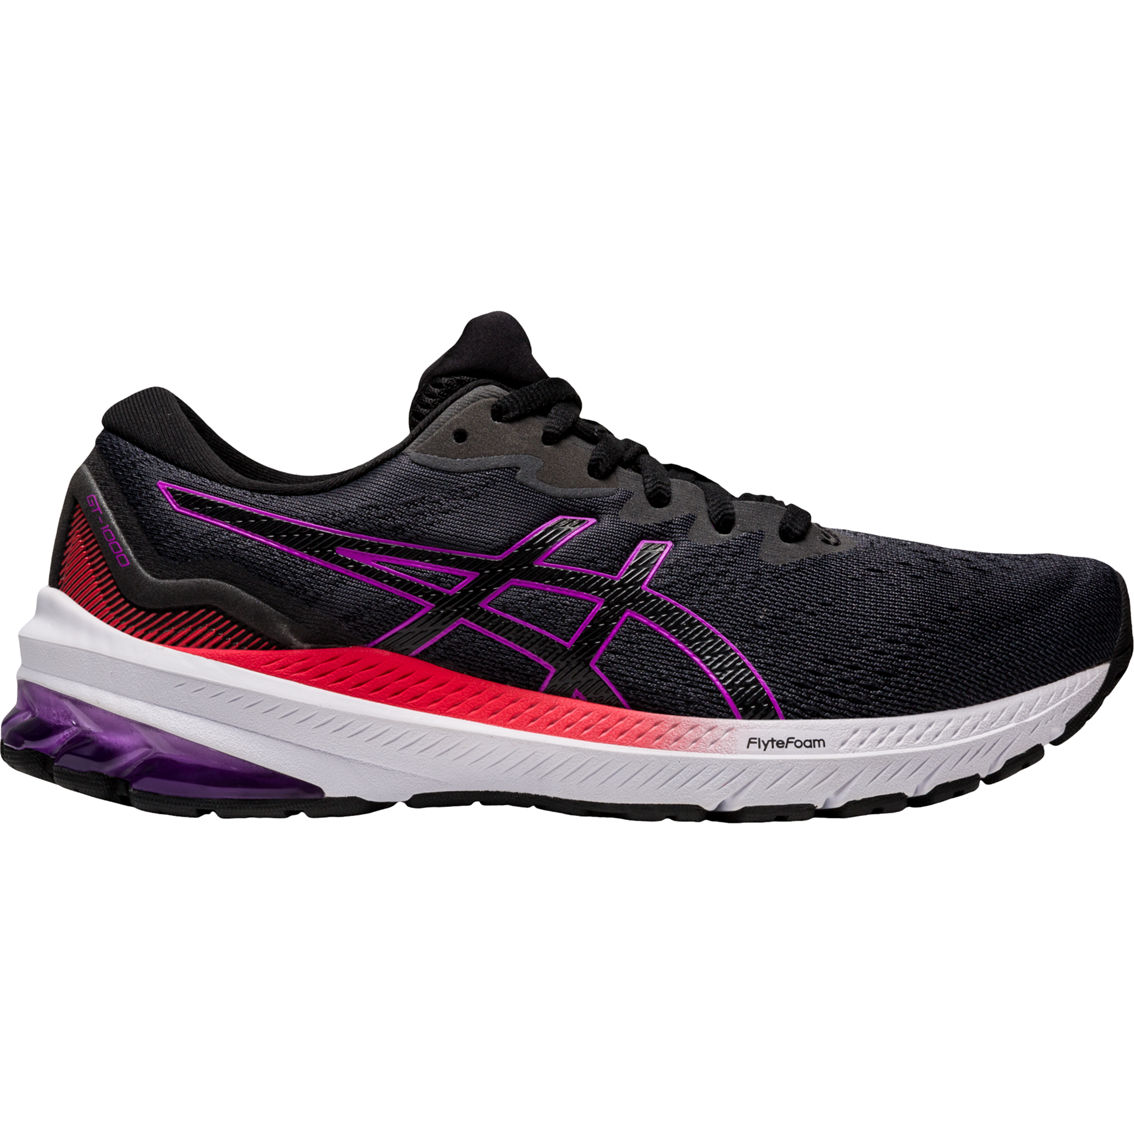 ASICS Women's GT-1000 11 Running Shoes - Image 2 of 6